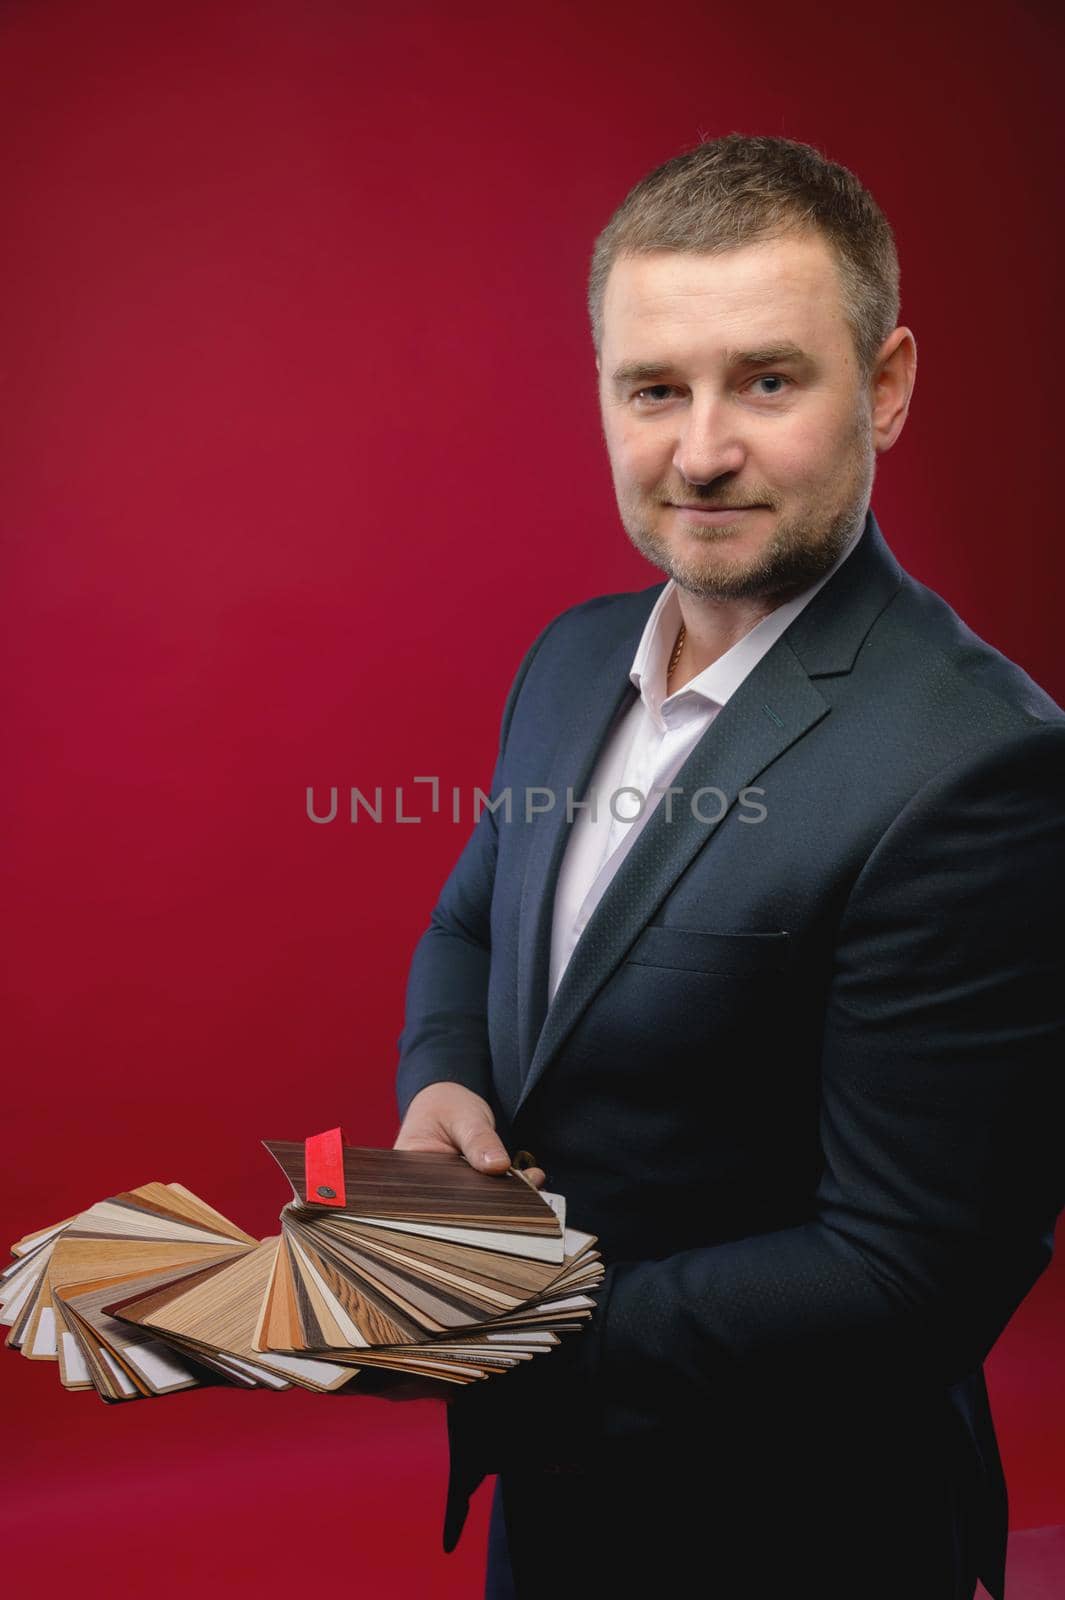 Portrait of a handsome man in an elegant suit Offers surface probes for kitchen furniture on a red background. Studio shot. looking thoughtfully into the camera by yanik88